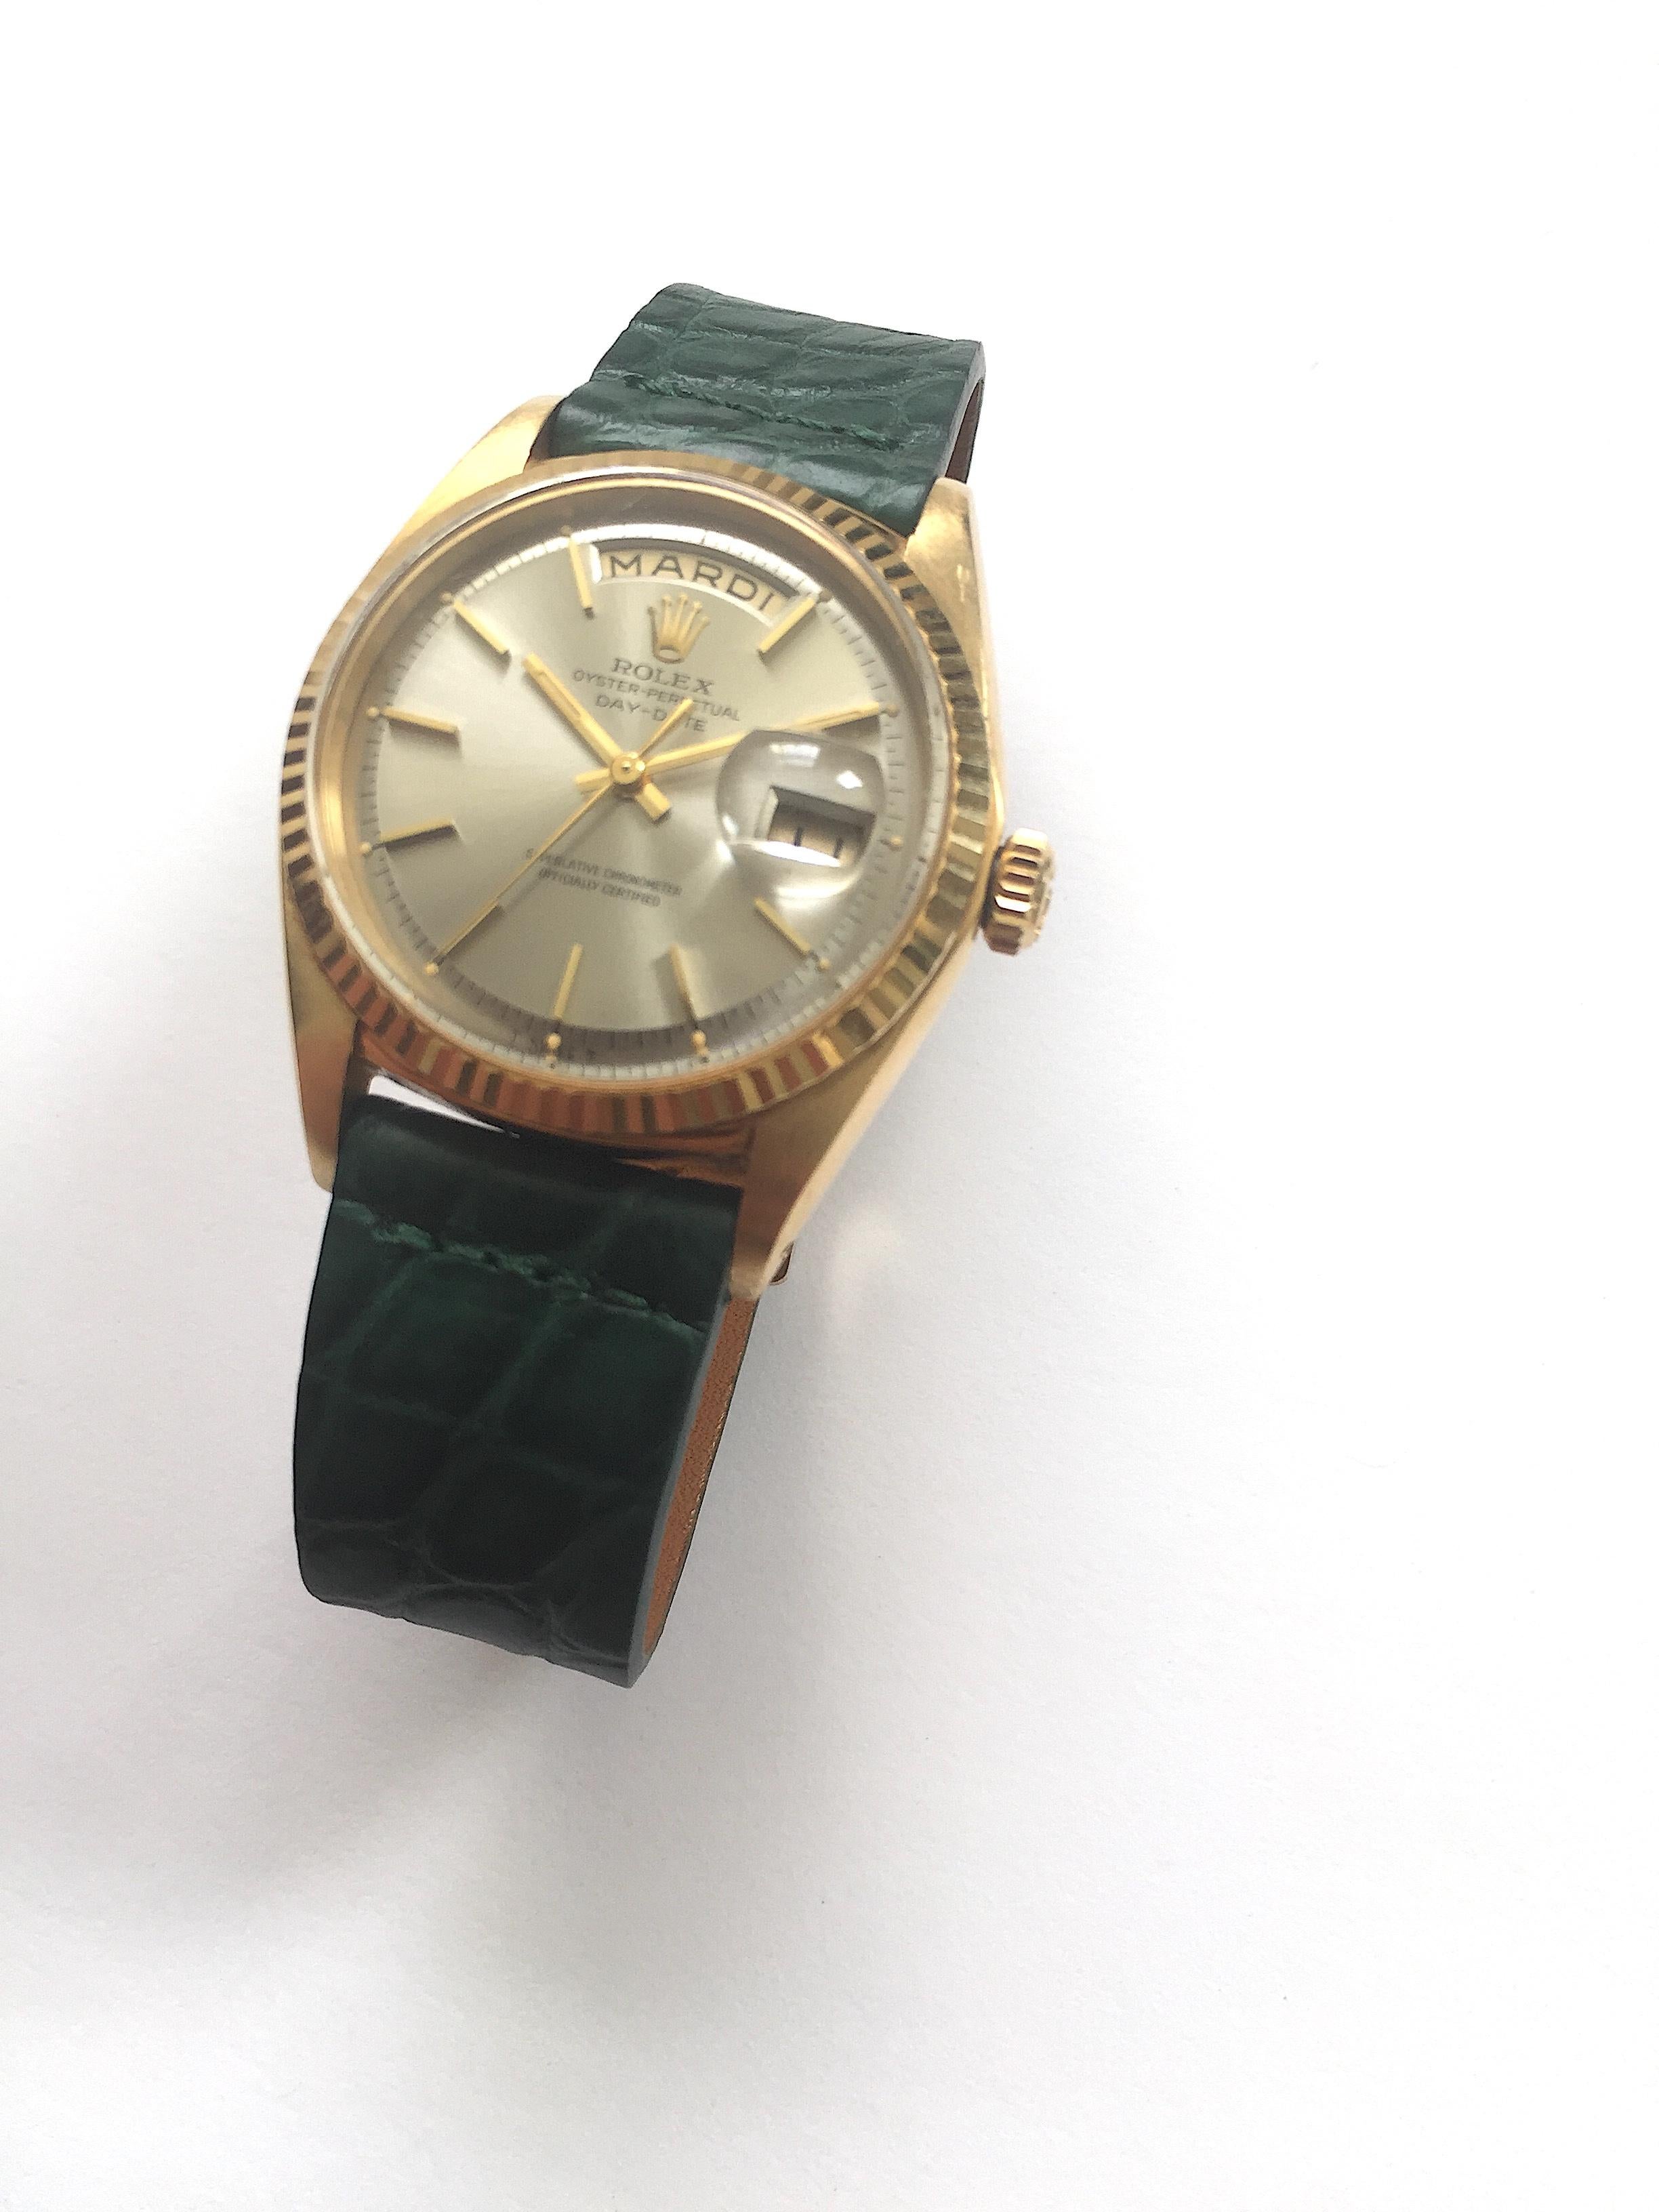 Rolex 18K Yellow Gold Day-Date Watch from the 1960s
Beautiful Factory Grey/Taupe Colored Dial with Applied Hour Markers 
Yellow Gold Gold Fluted Bezel
18K Yellow Gold Case
36mm in size 
Features Rolex Automatic Movement with Non-Quick Day and Date